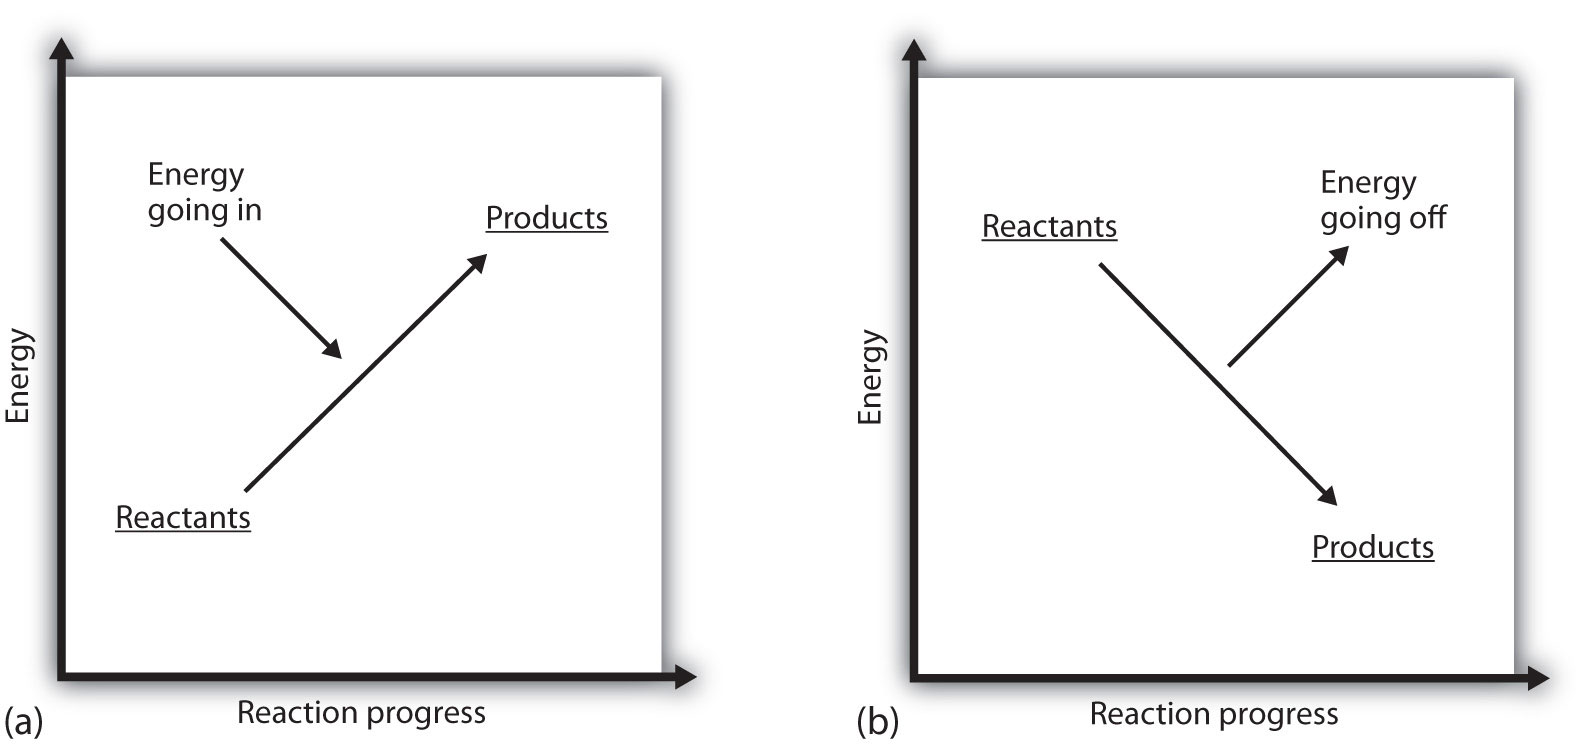 Two graphs of reaction progress versus energy are shown.